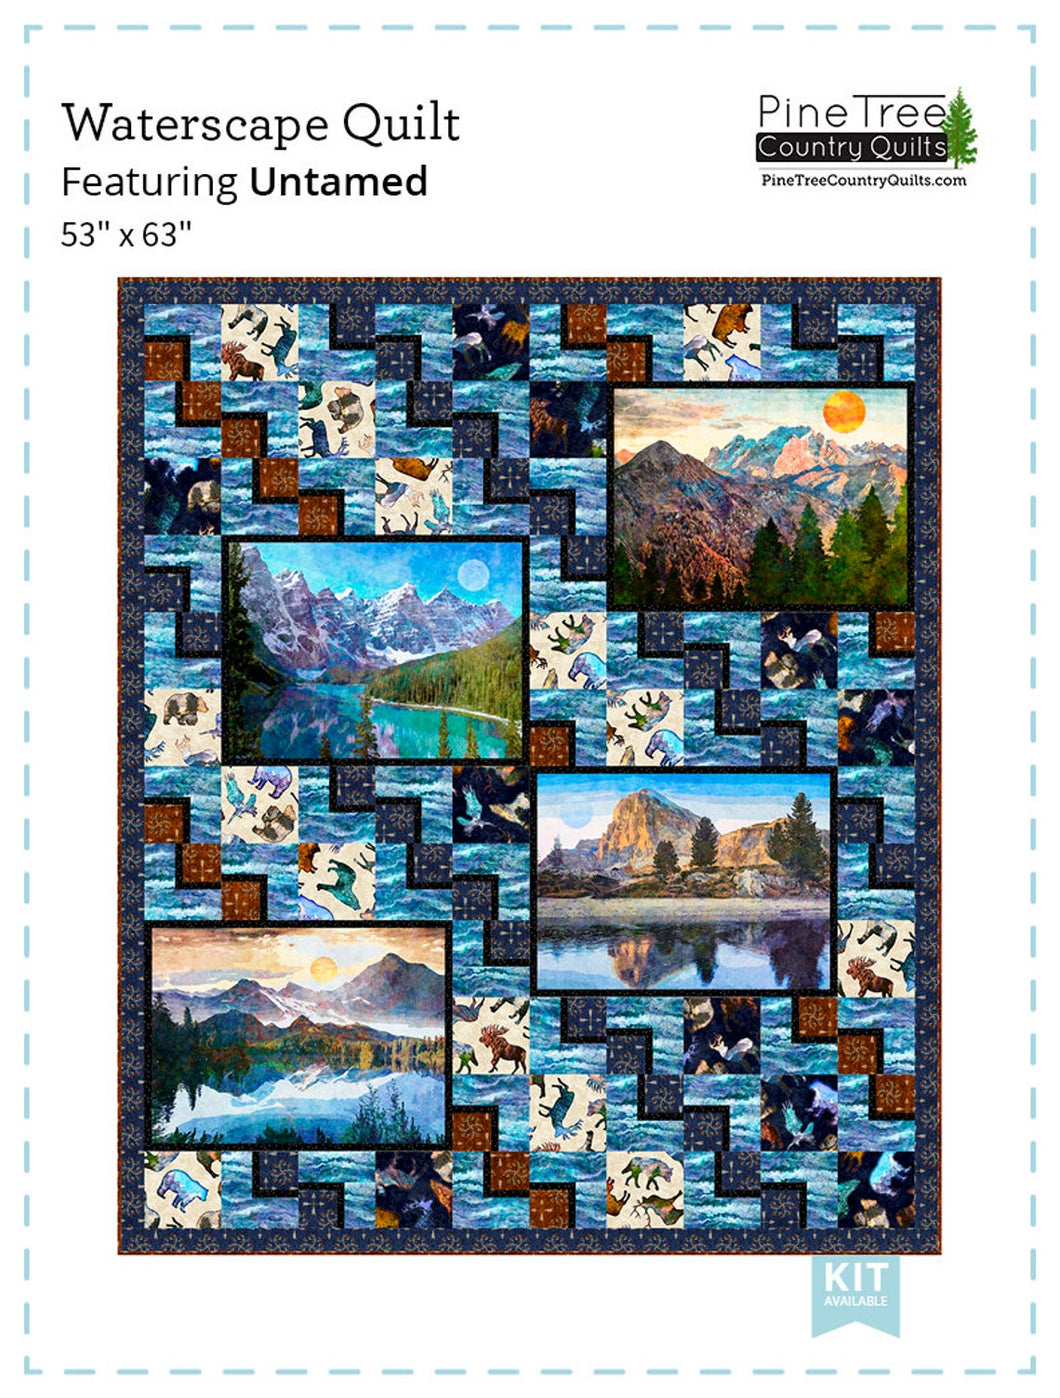 Waterscape Quilt Kit 4092A Featuring Untamed